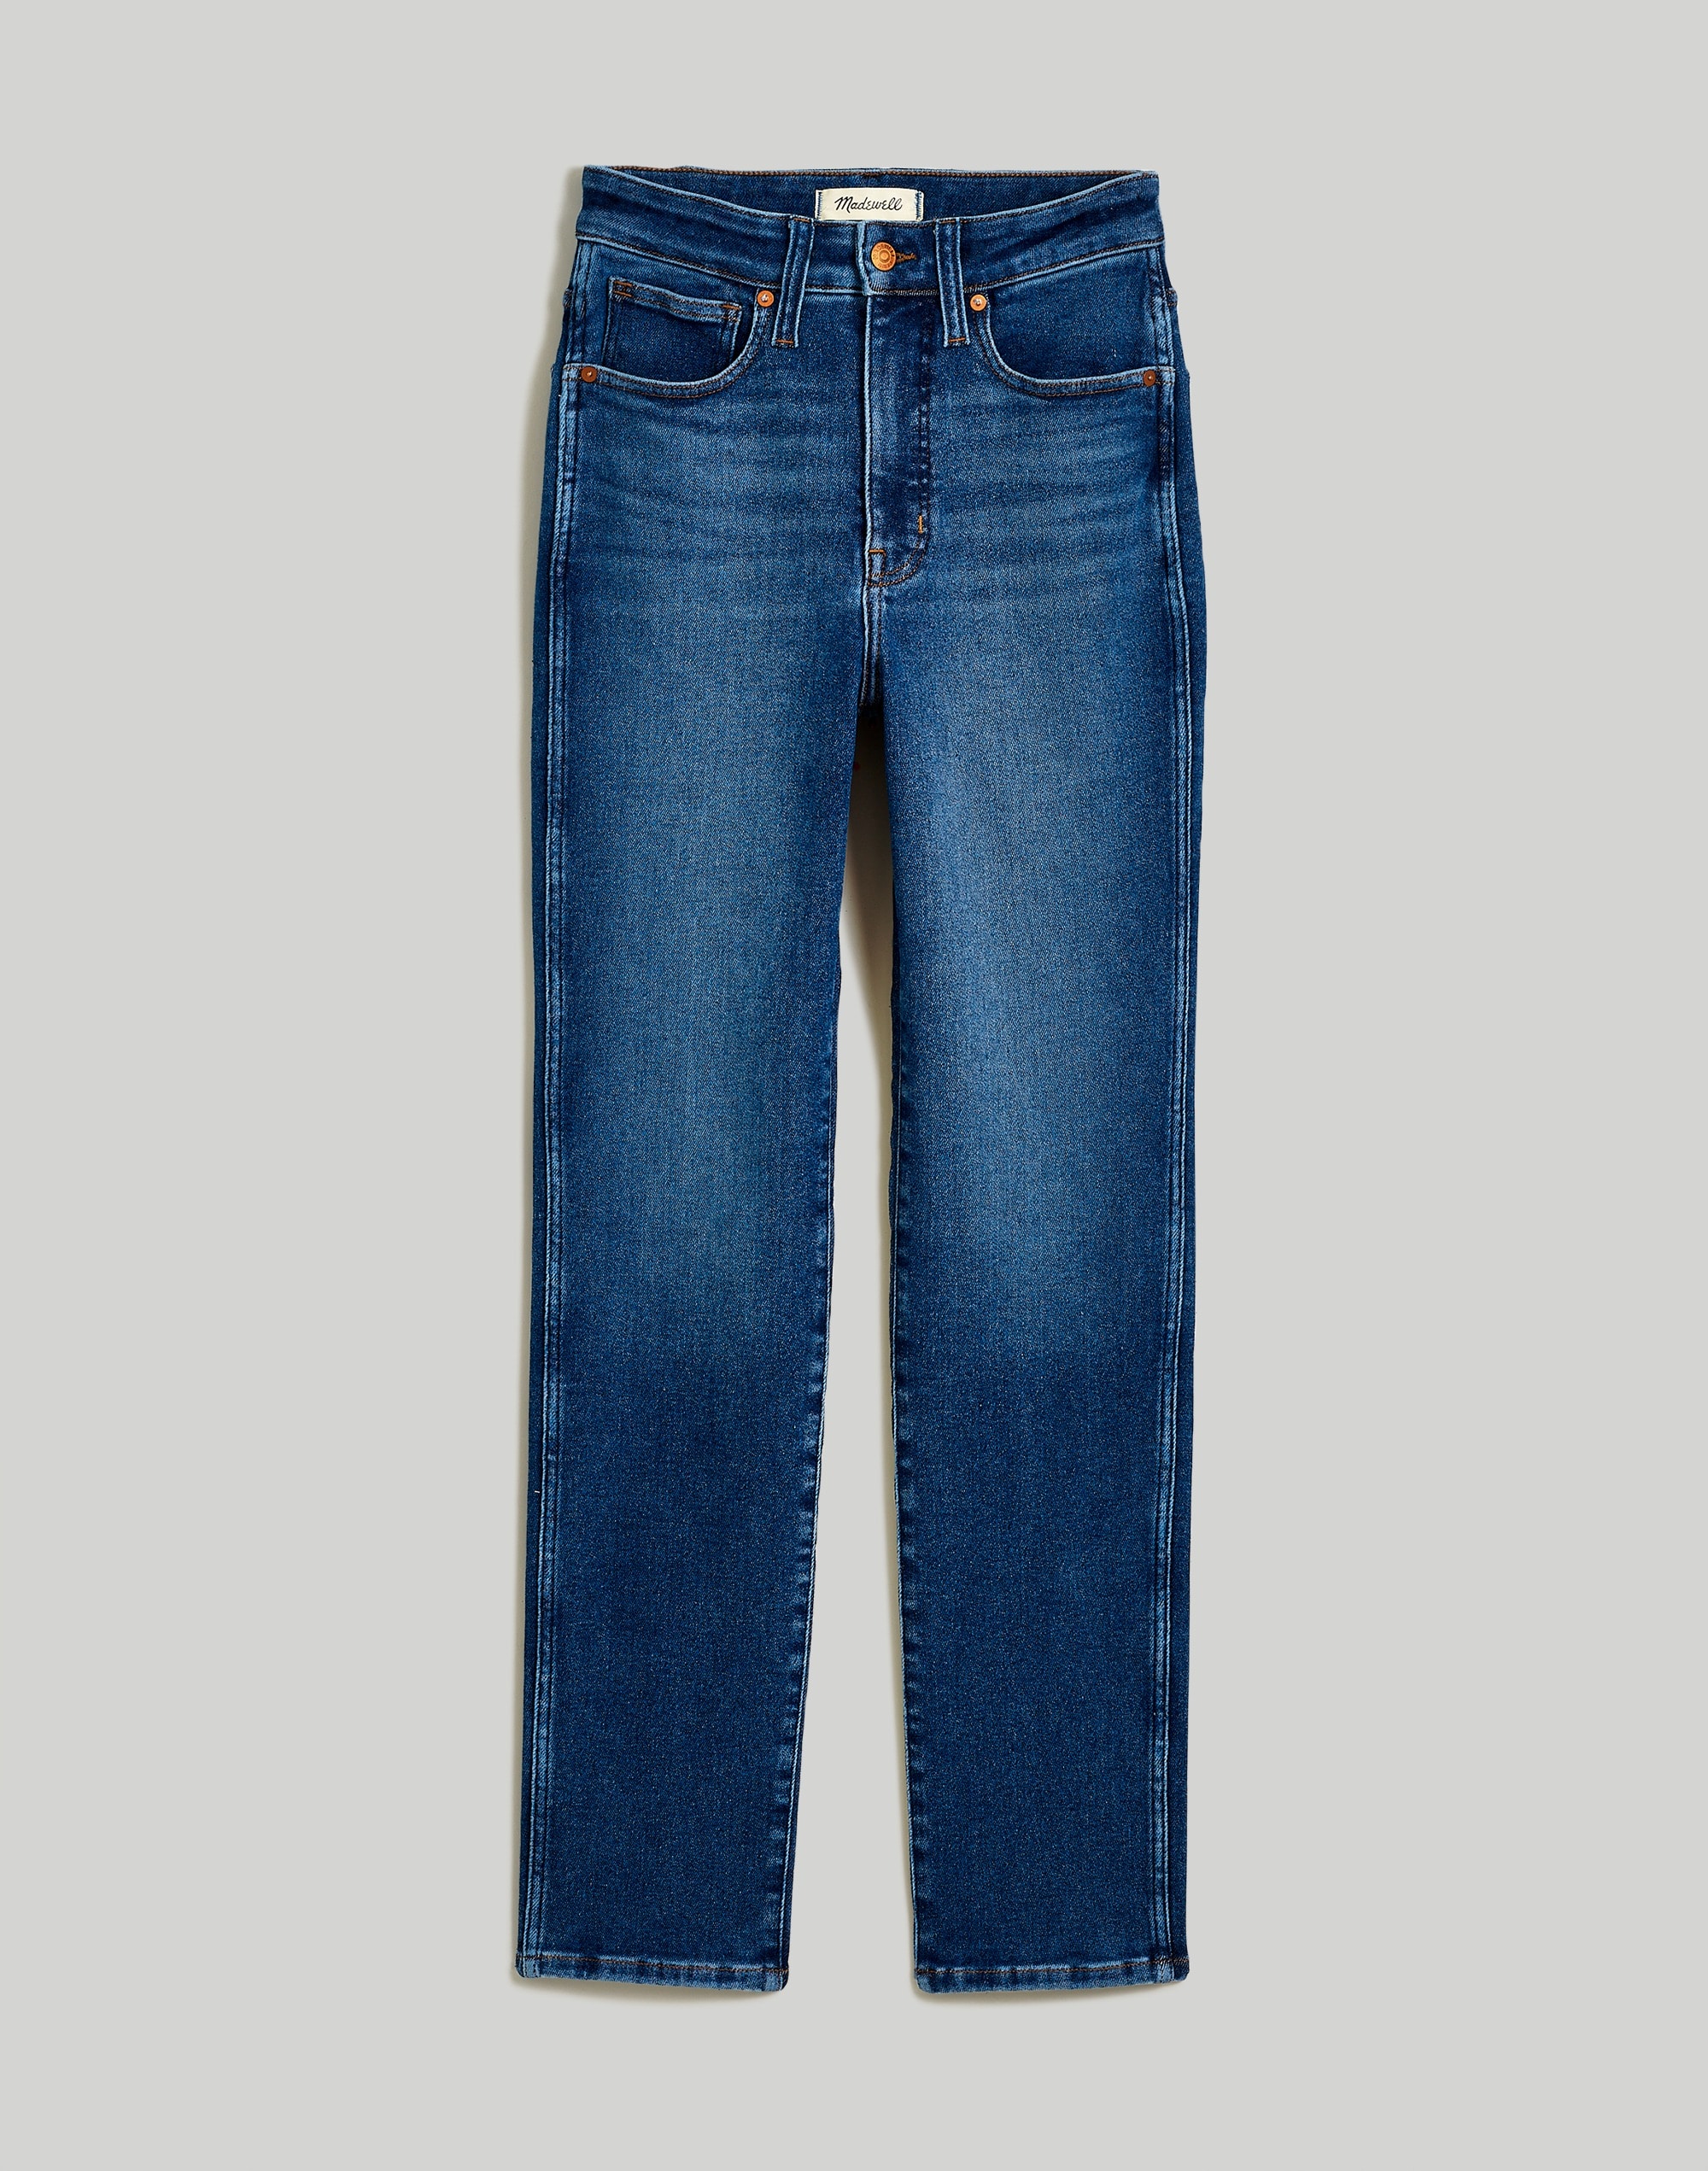 Curvy Stovepipe Jeans